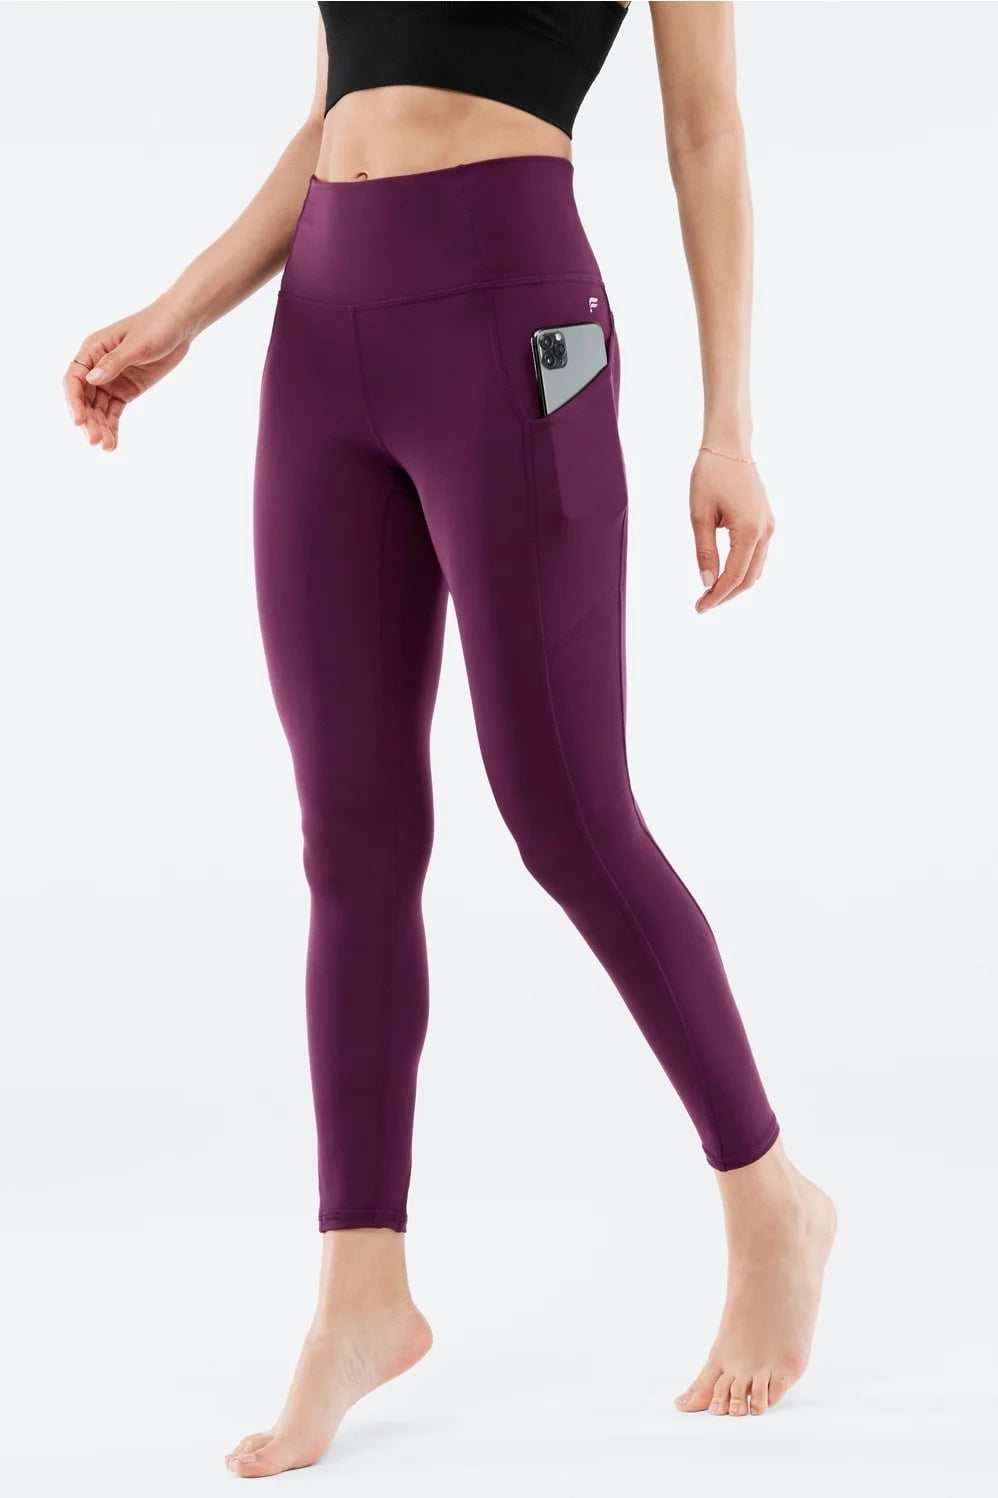 Fabletics Oasis PureLuxe High-Waisted 7/8 Legging Size Small: S